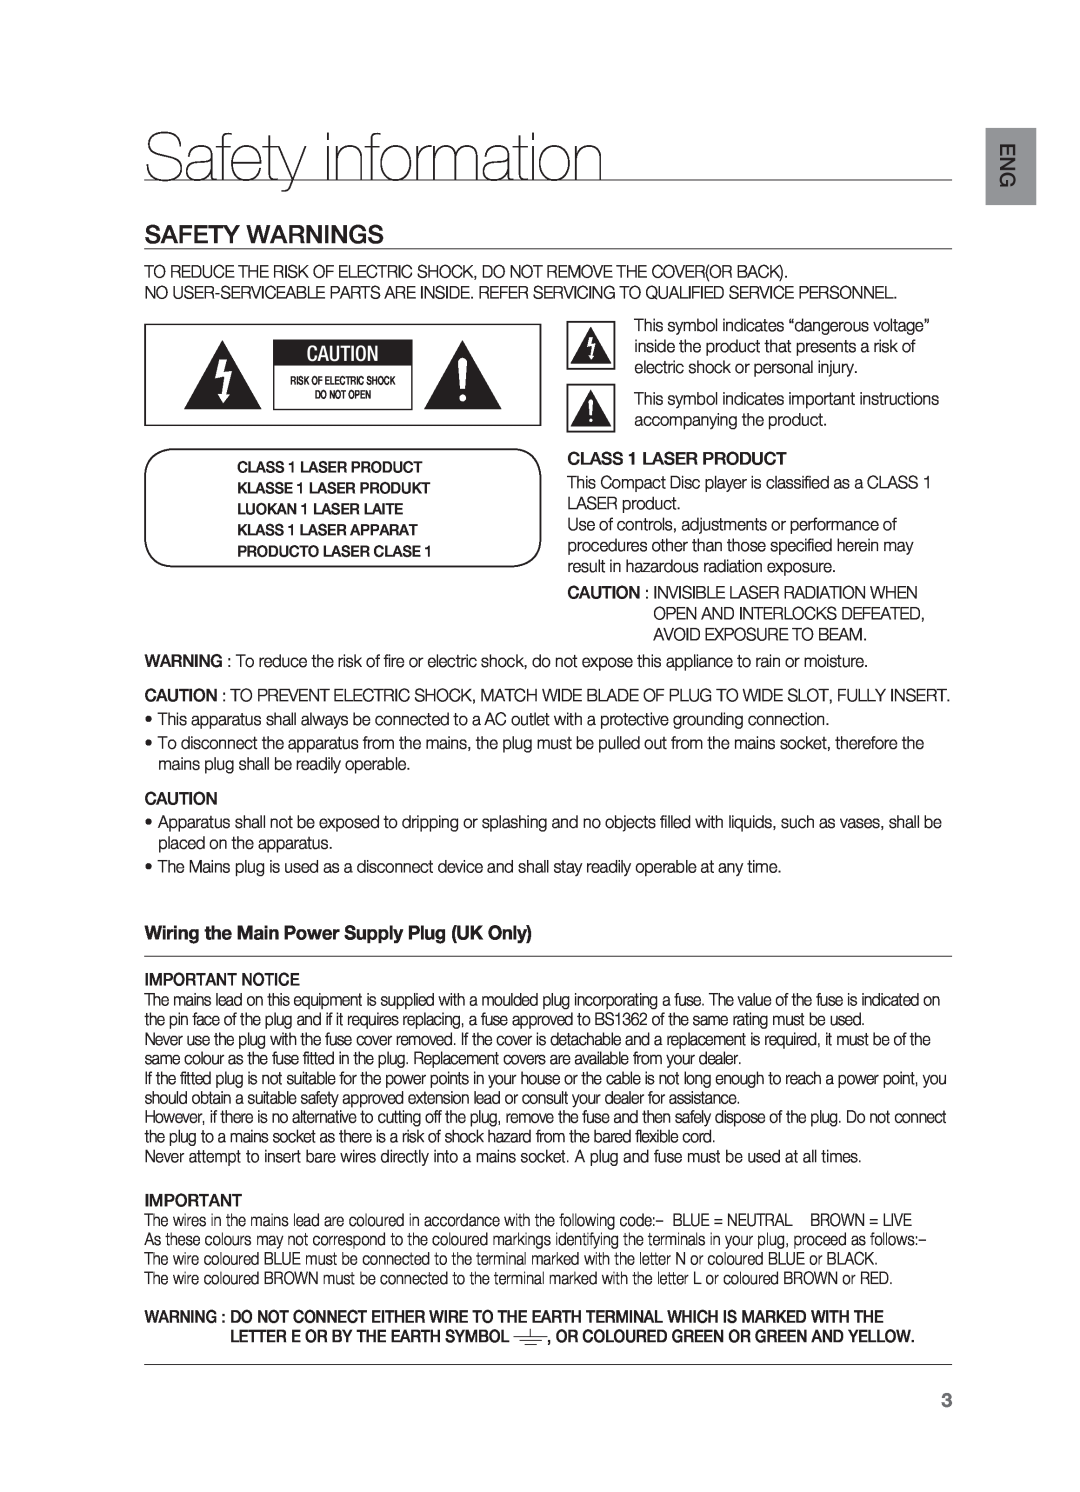 Samsung HT-X725G, HT-TX725G user manual Safety information, Safety Warnings, Wiring the Main Power Supply Plug UK Only 